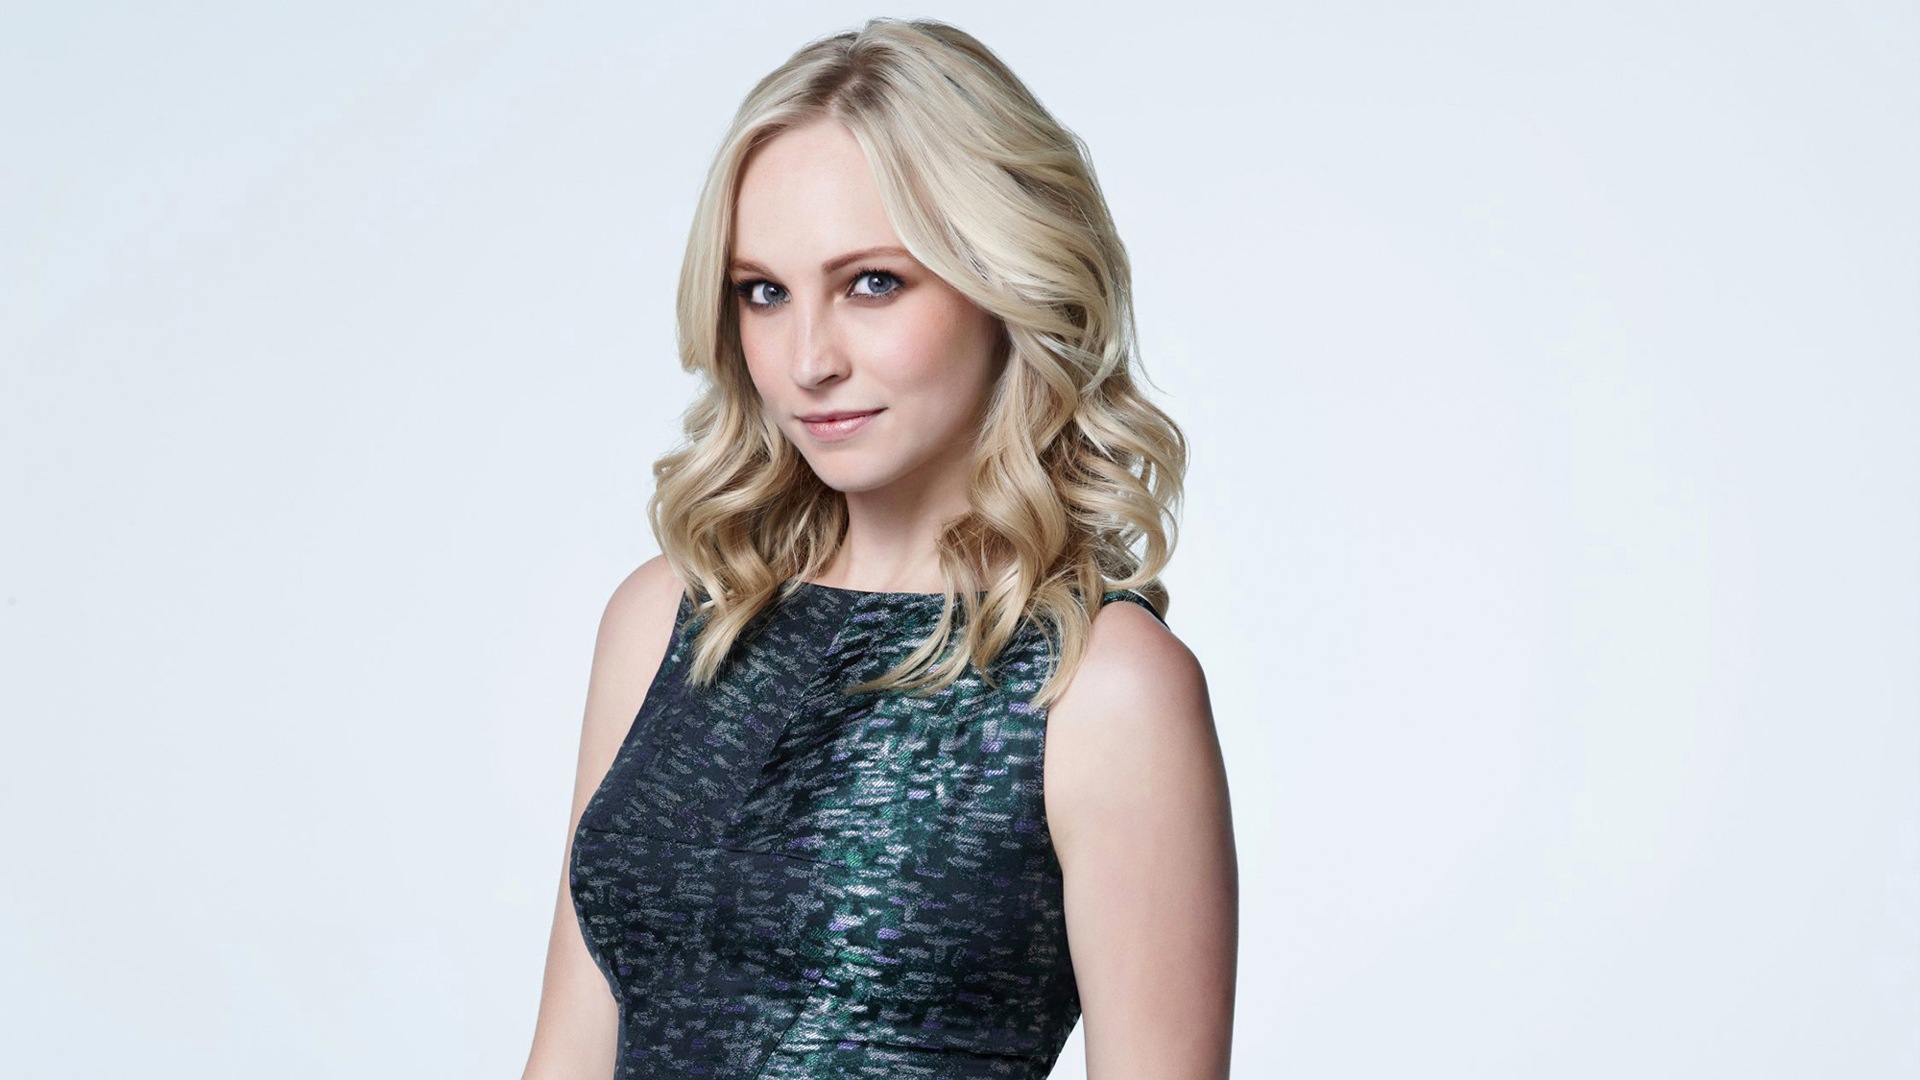 Candice Accola HD wallpapers #3 - 1920x1080